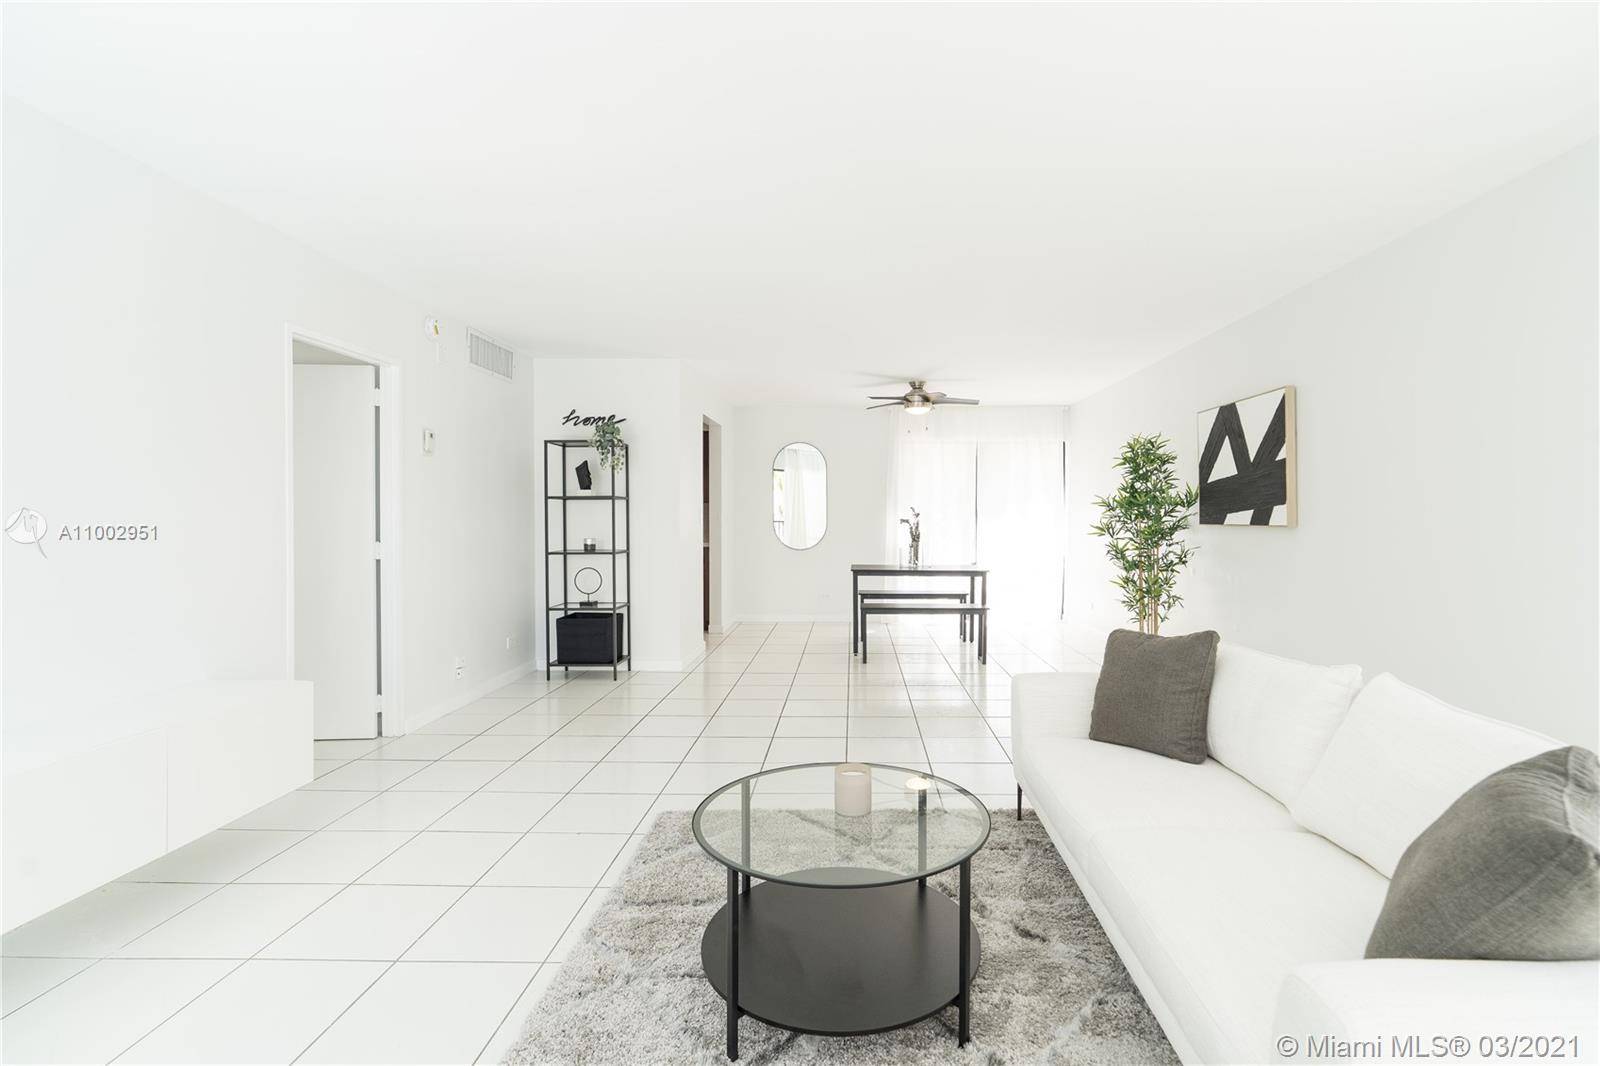 21 Apartments is a 22 unit boutique rental community conveniently located directly across the street from the pristine Fort Lauderdale beach.